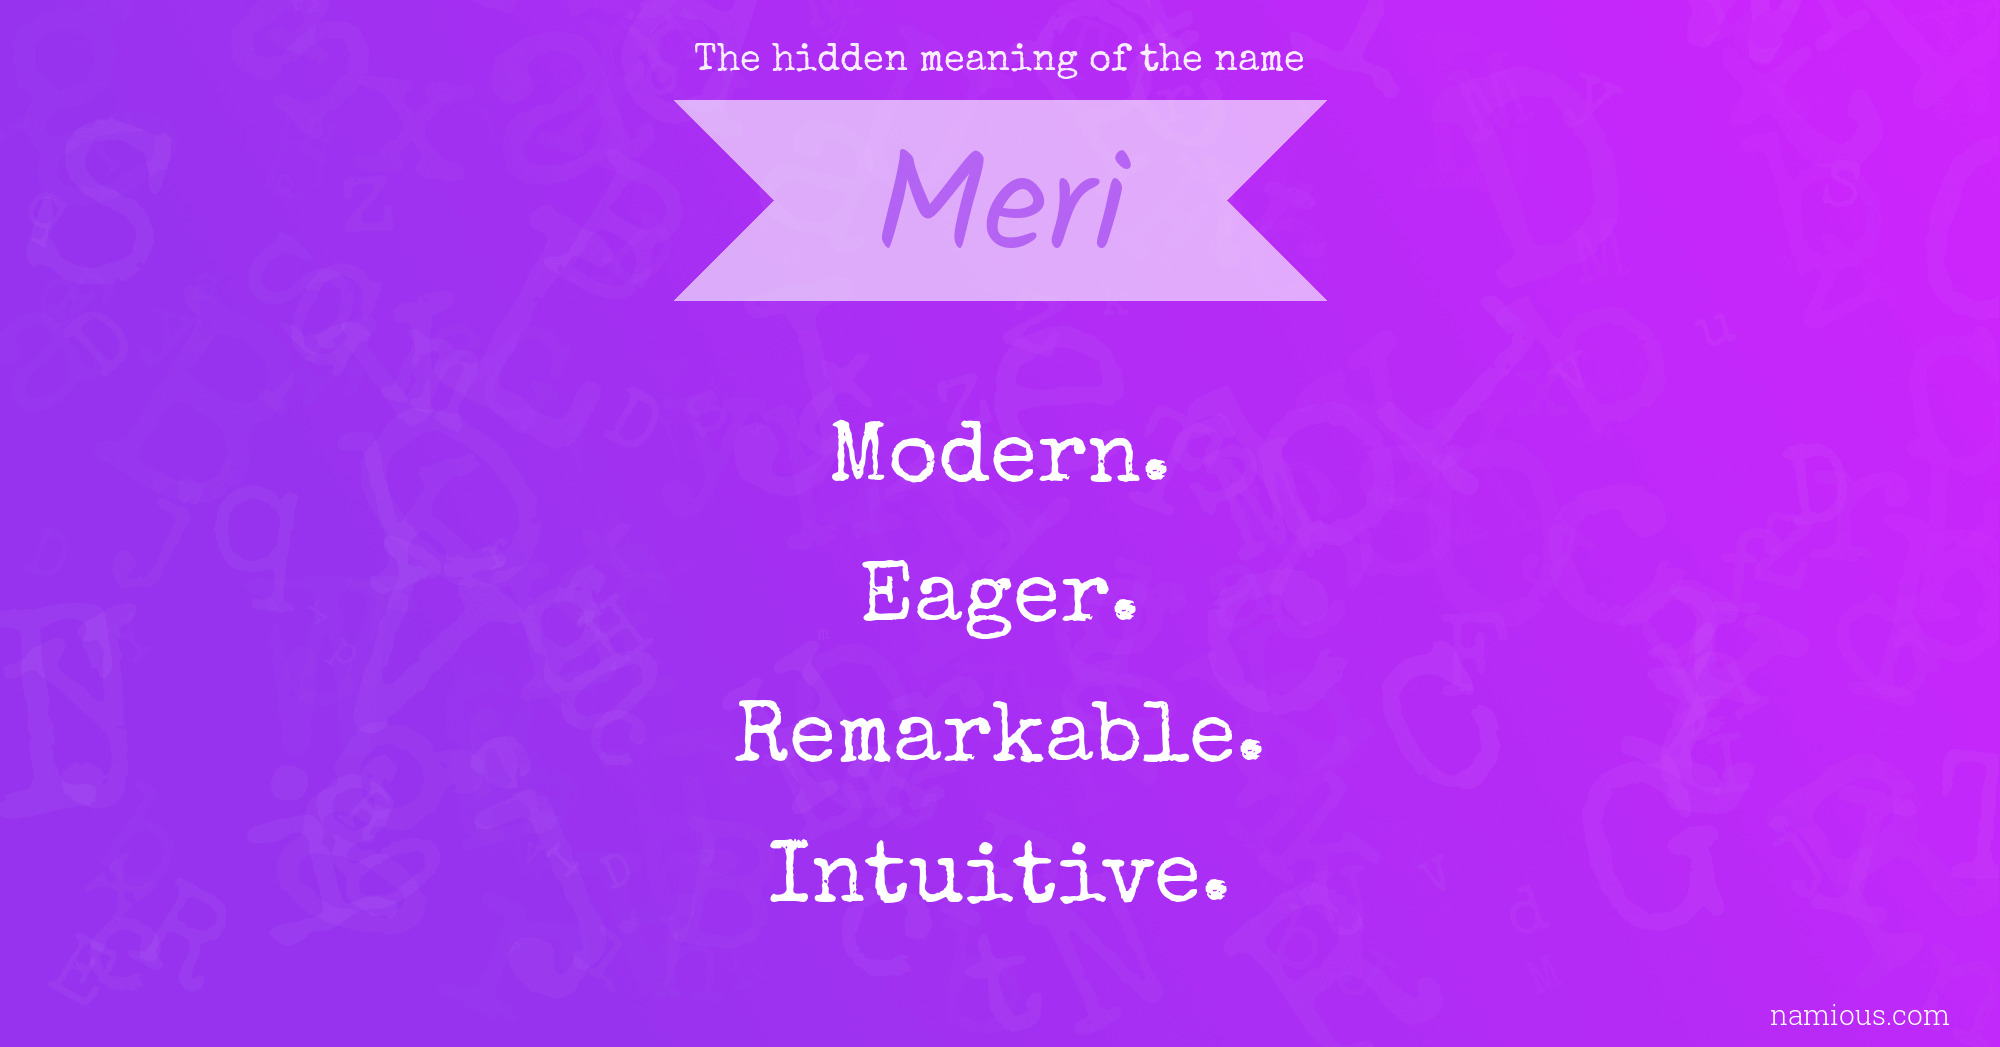 The hidden meaning of the name Meri